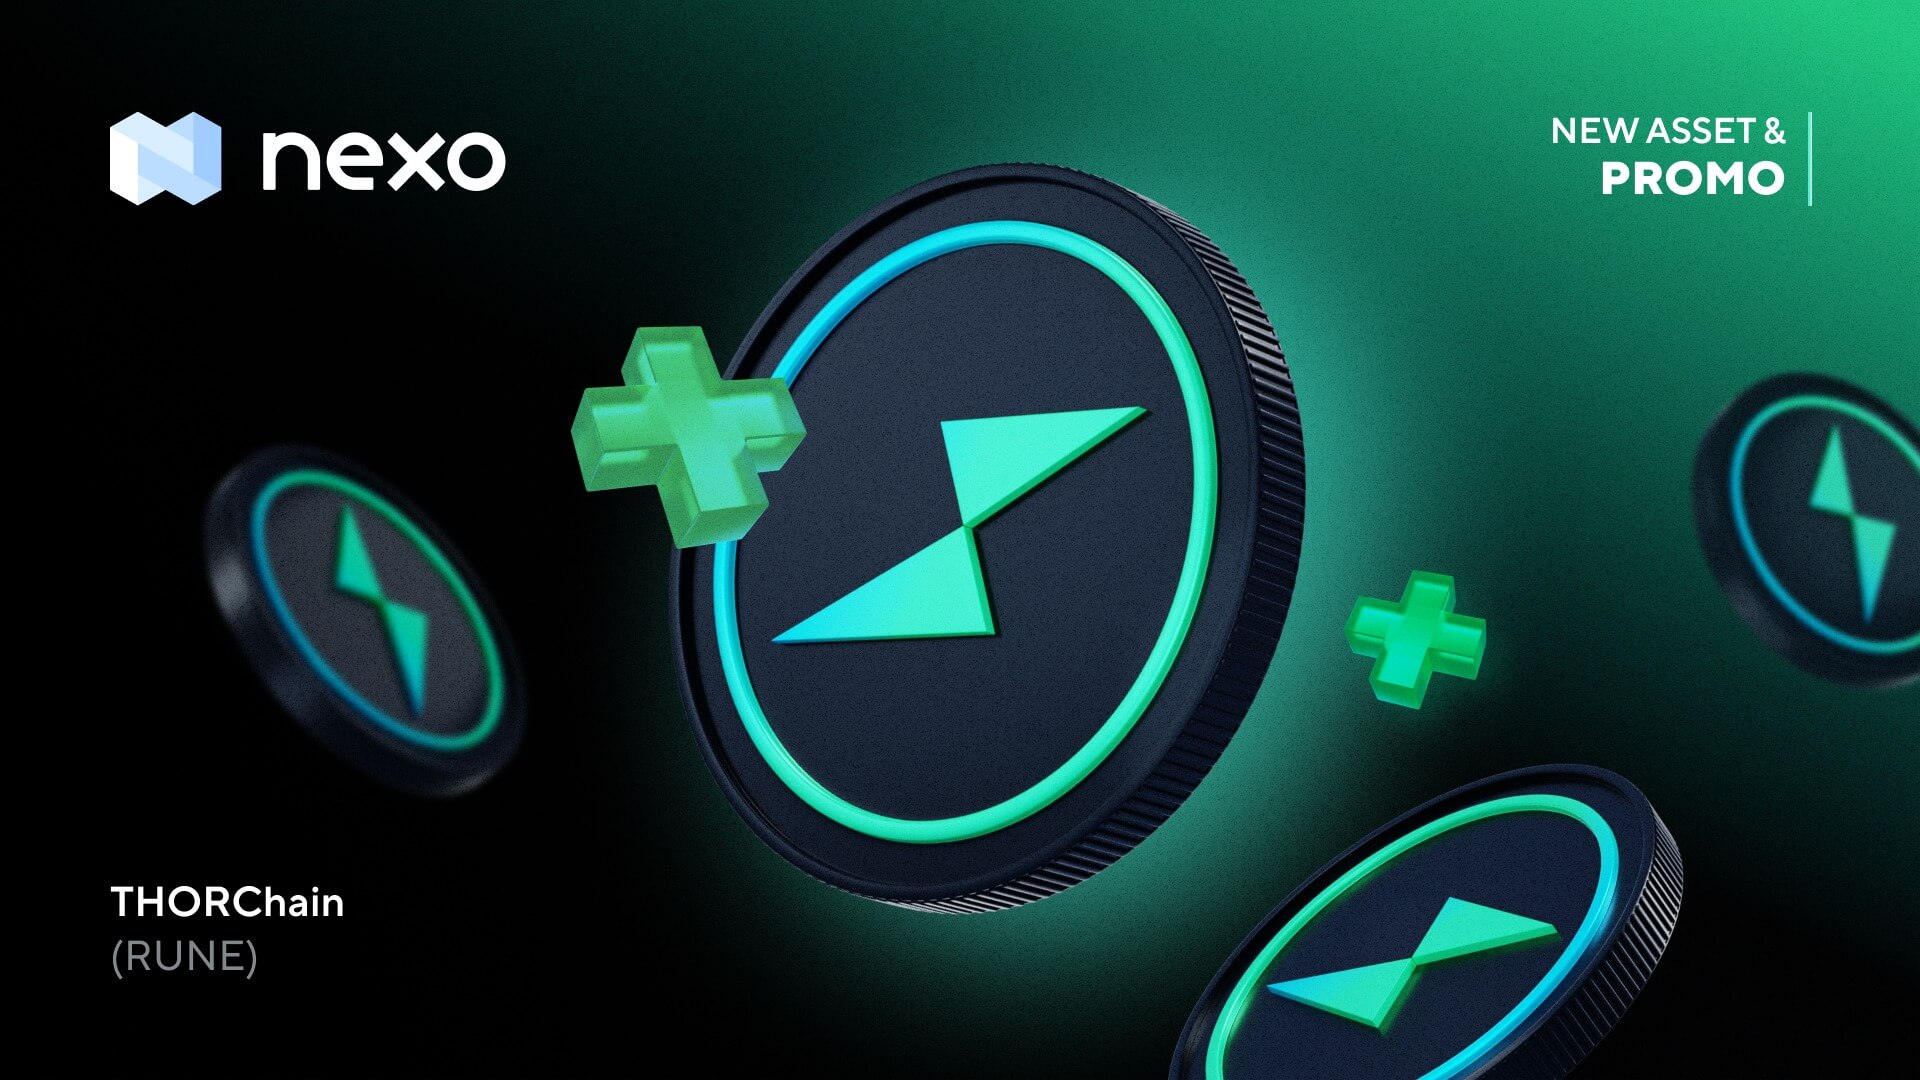 RUNE is on Nexo with 18% APR Promo Rate!